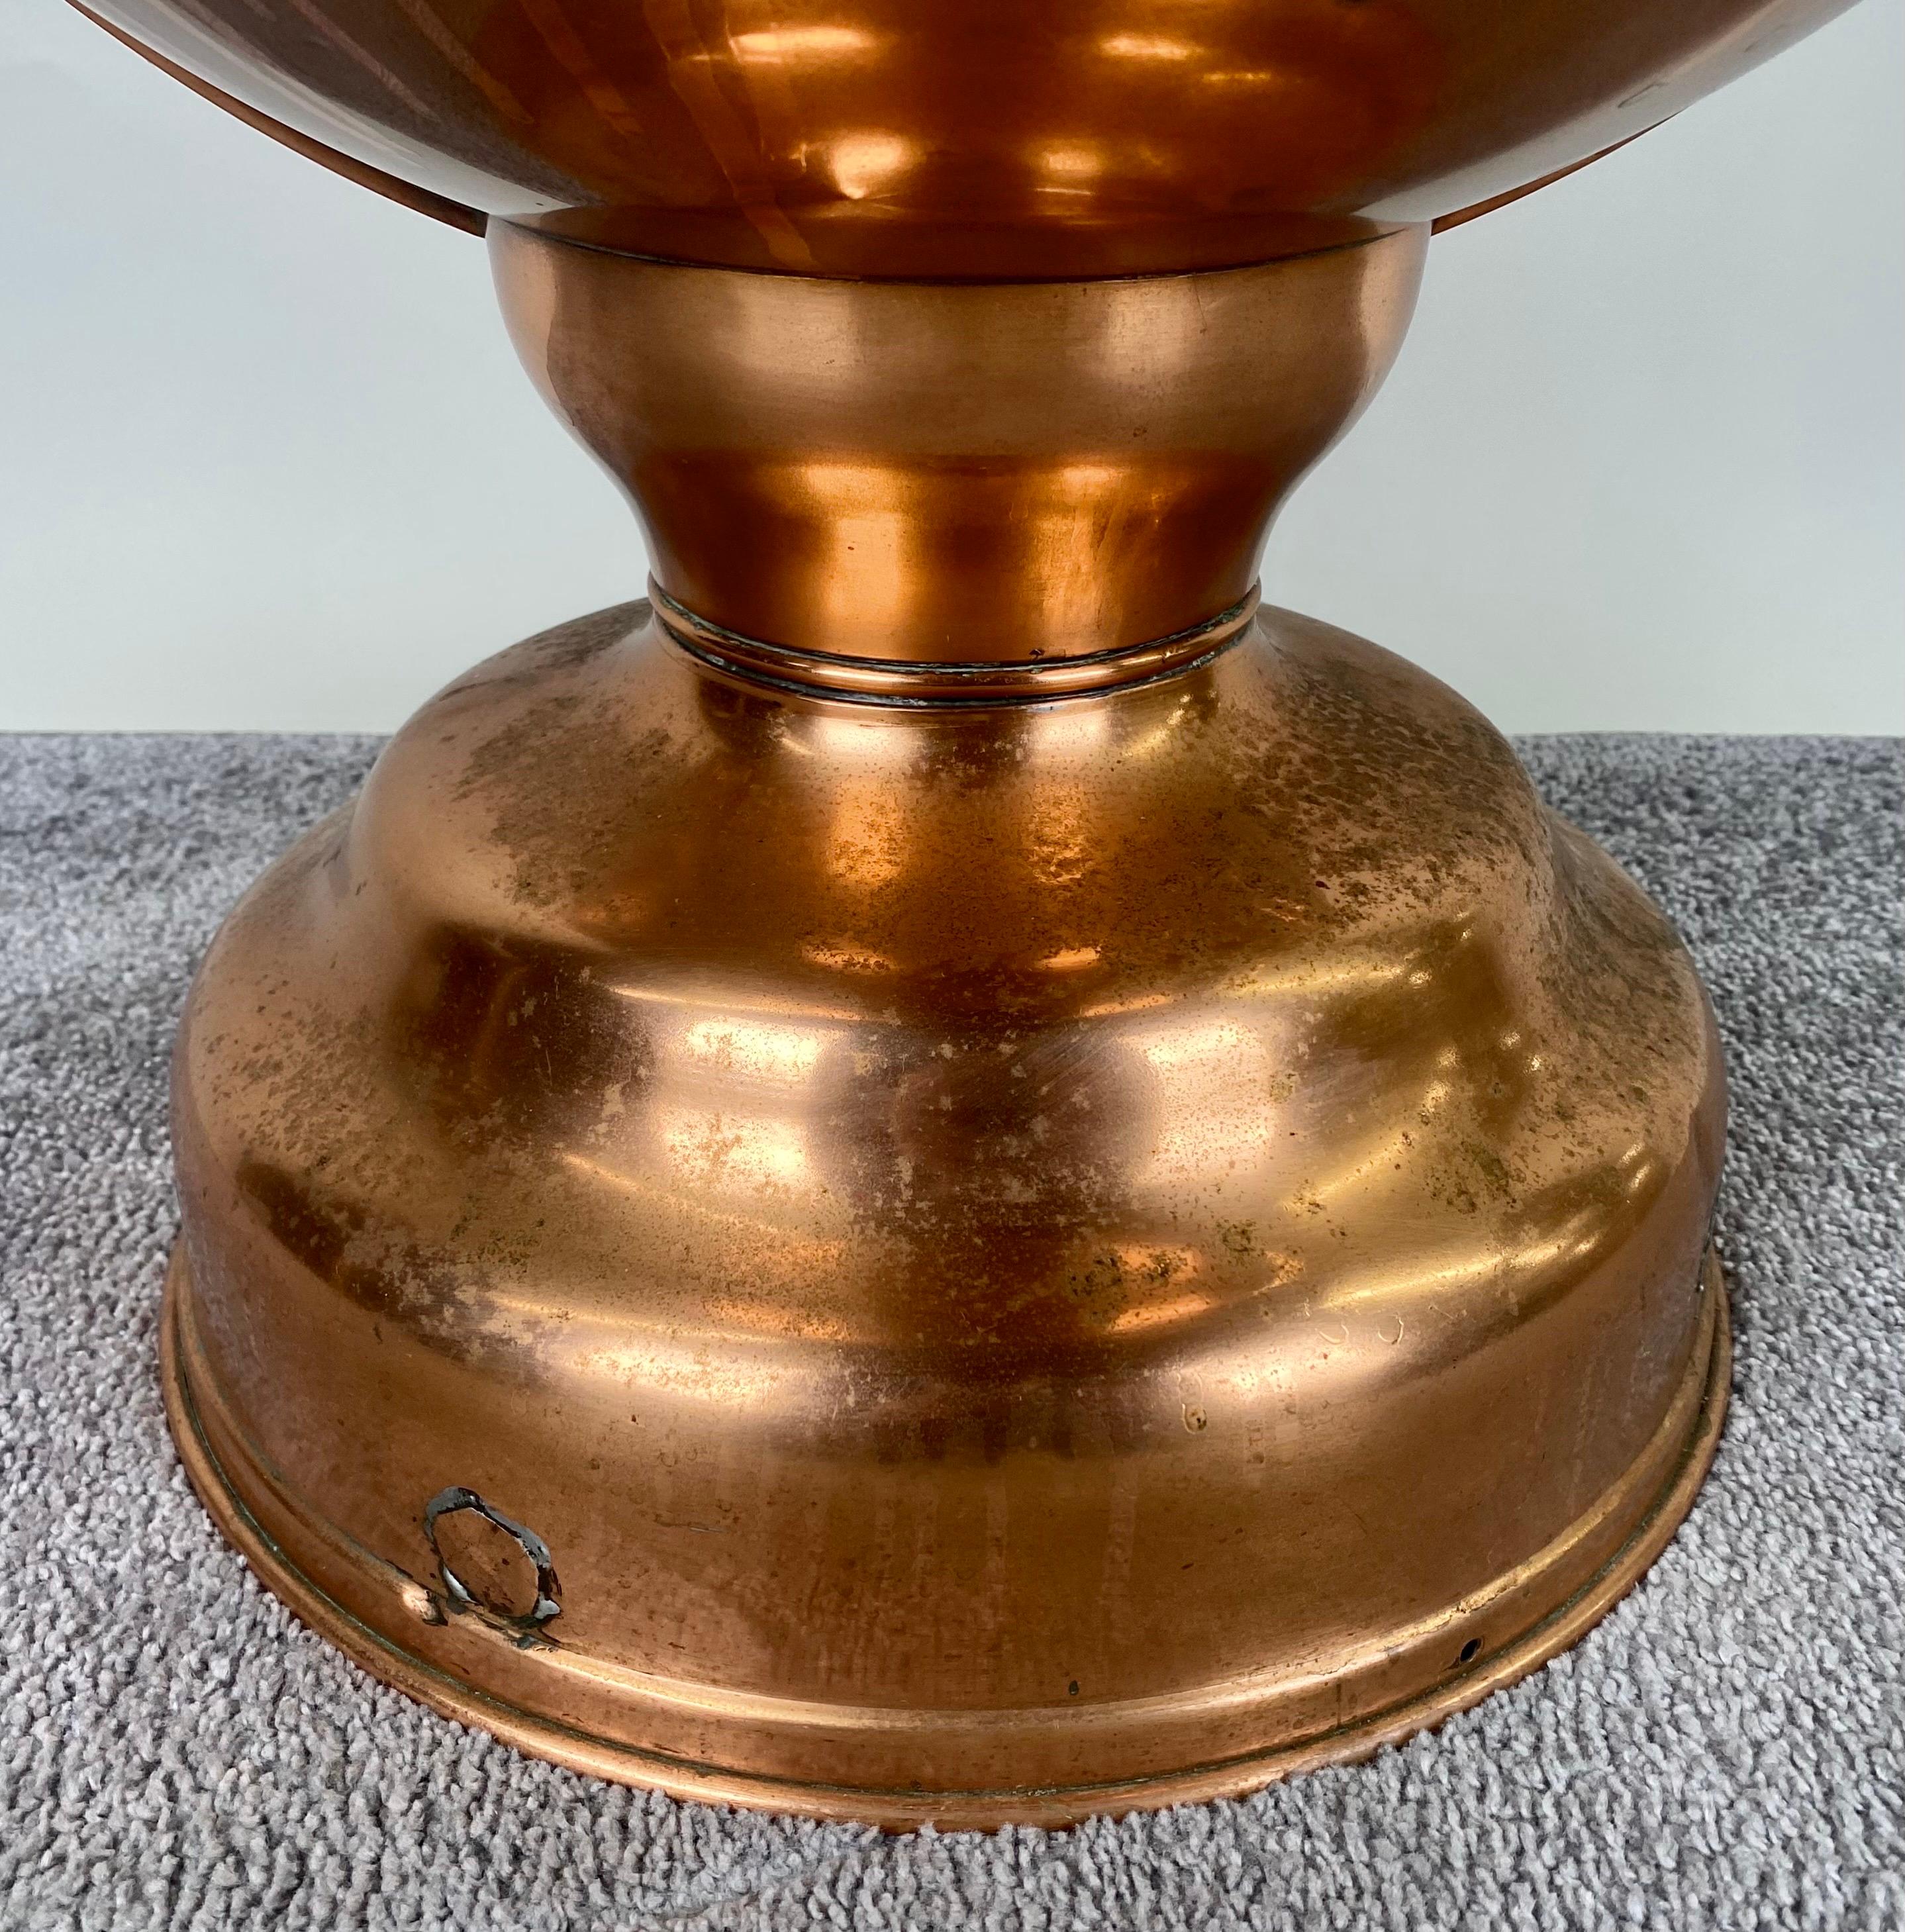 An early 20th-century Globe copper coal scuttle, a delightful fusion of functionality and vintage elegance.  This exquisite piece features its original brass hardware, adding a touch of authenticity to its timeless appeal.

The scuttle's allure is